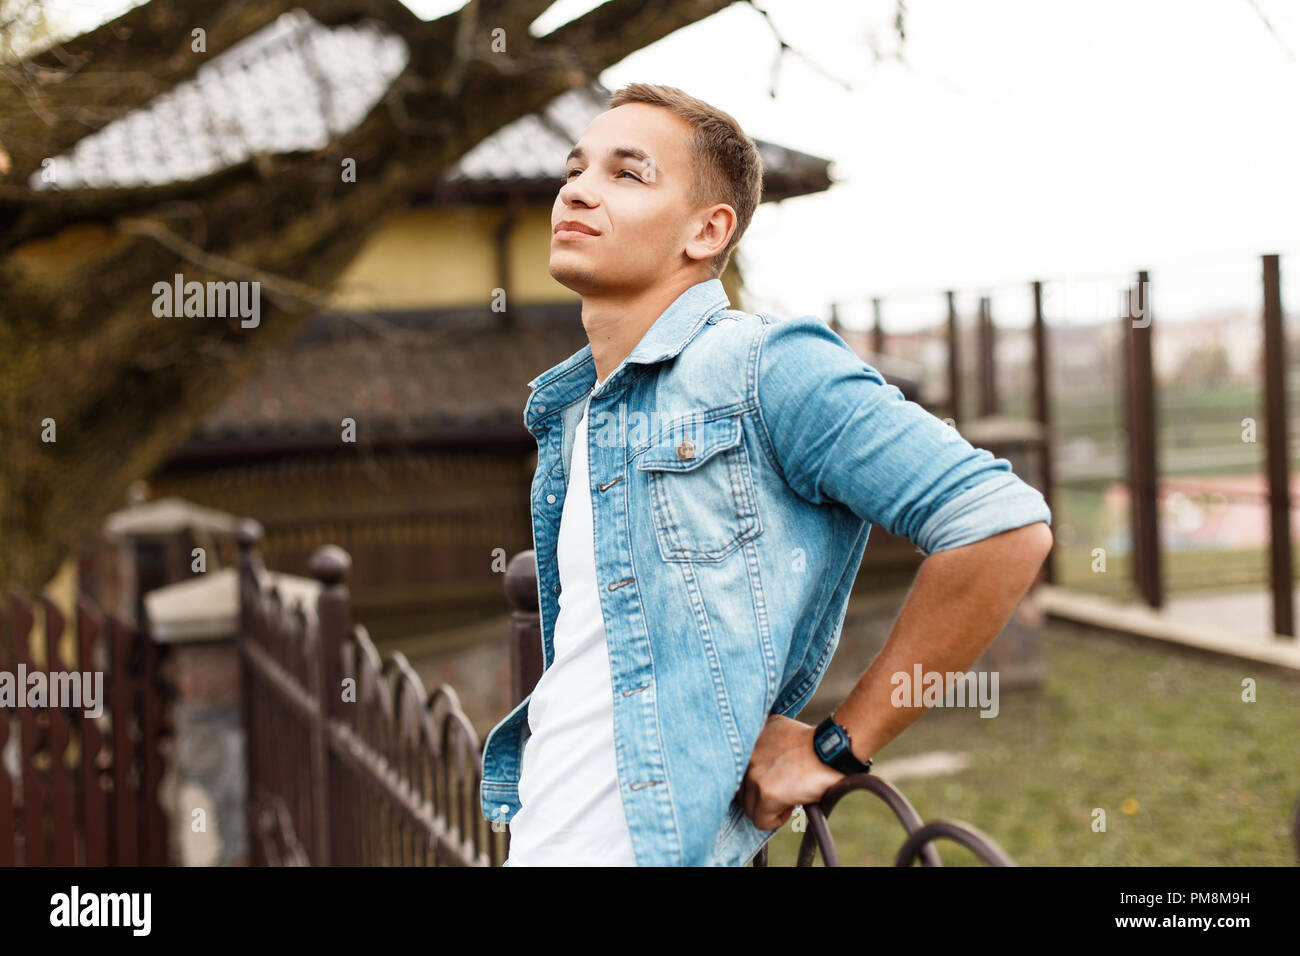 Handsome young stylish man in a jeans jacket and a white T-shirt is enjoying the moment and looking up Stock Photo